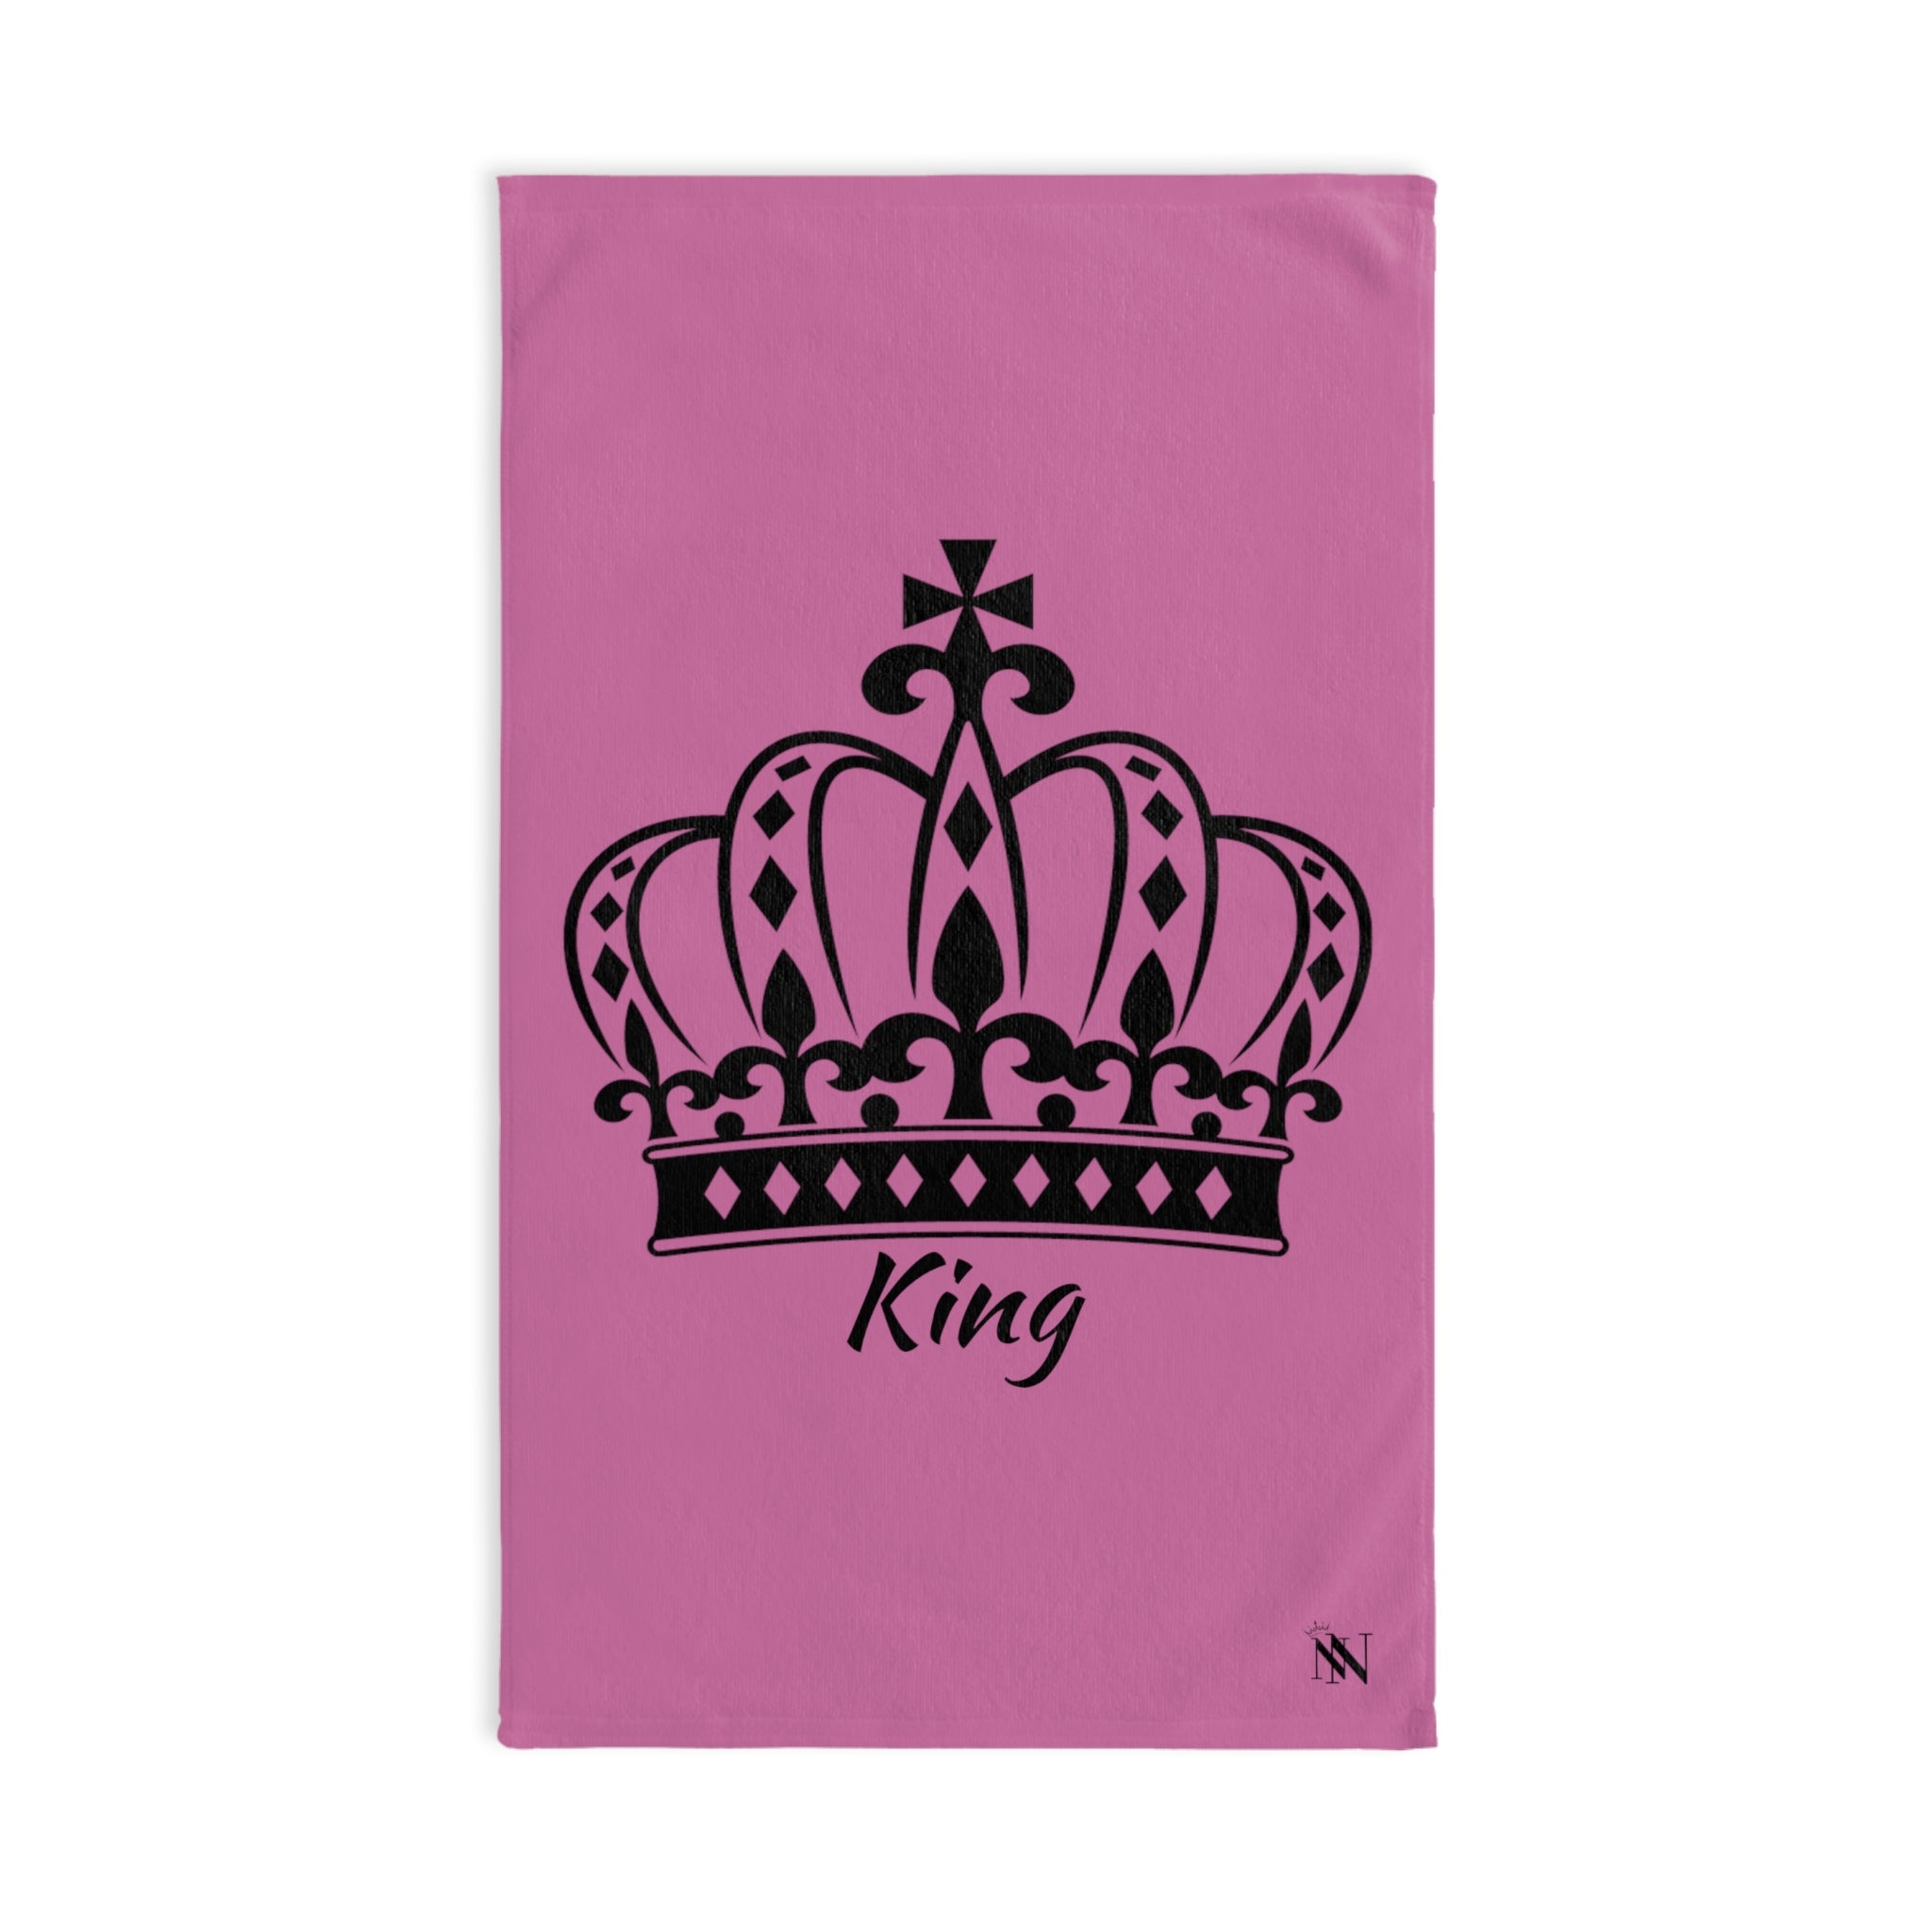 King Crown PrincePink | Novelty Gifts for Boyfriend, Funny Towel Romantic Gift for Wedding Couple Fiance First Year Anniversary Valentines, Party Gag Gifts, Joke Humor Cloth for Husband Men BF NECTAR NAPKINS